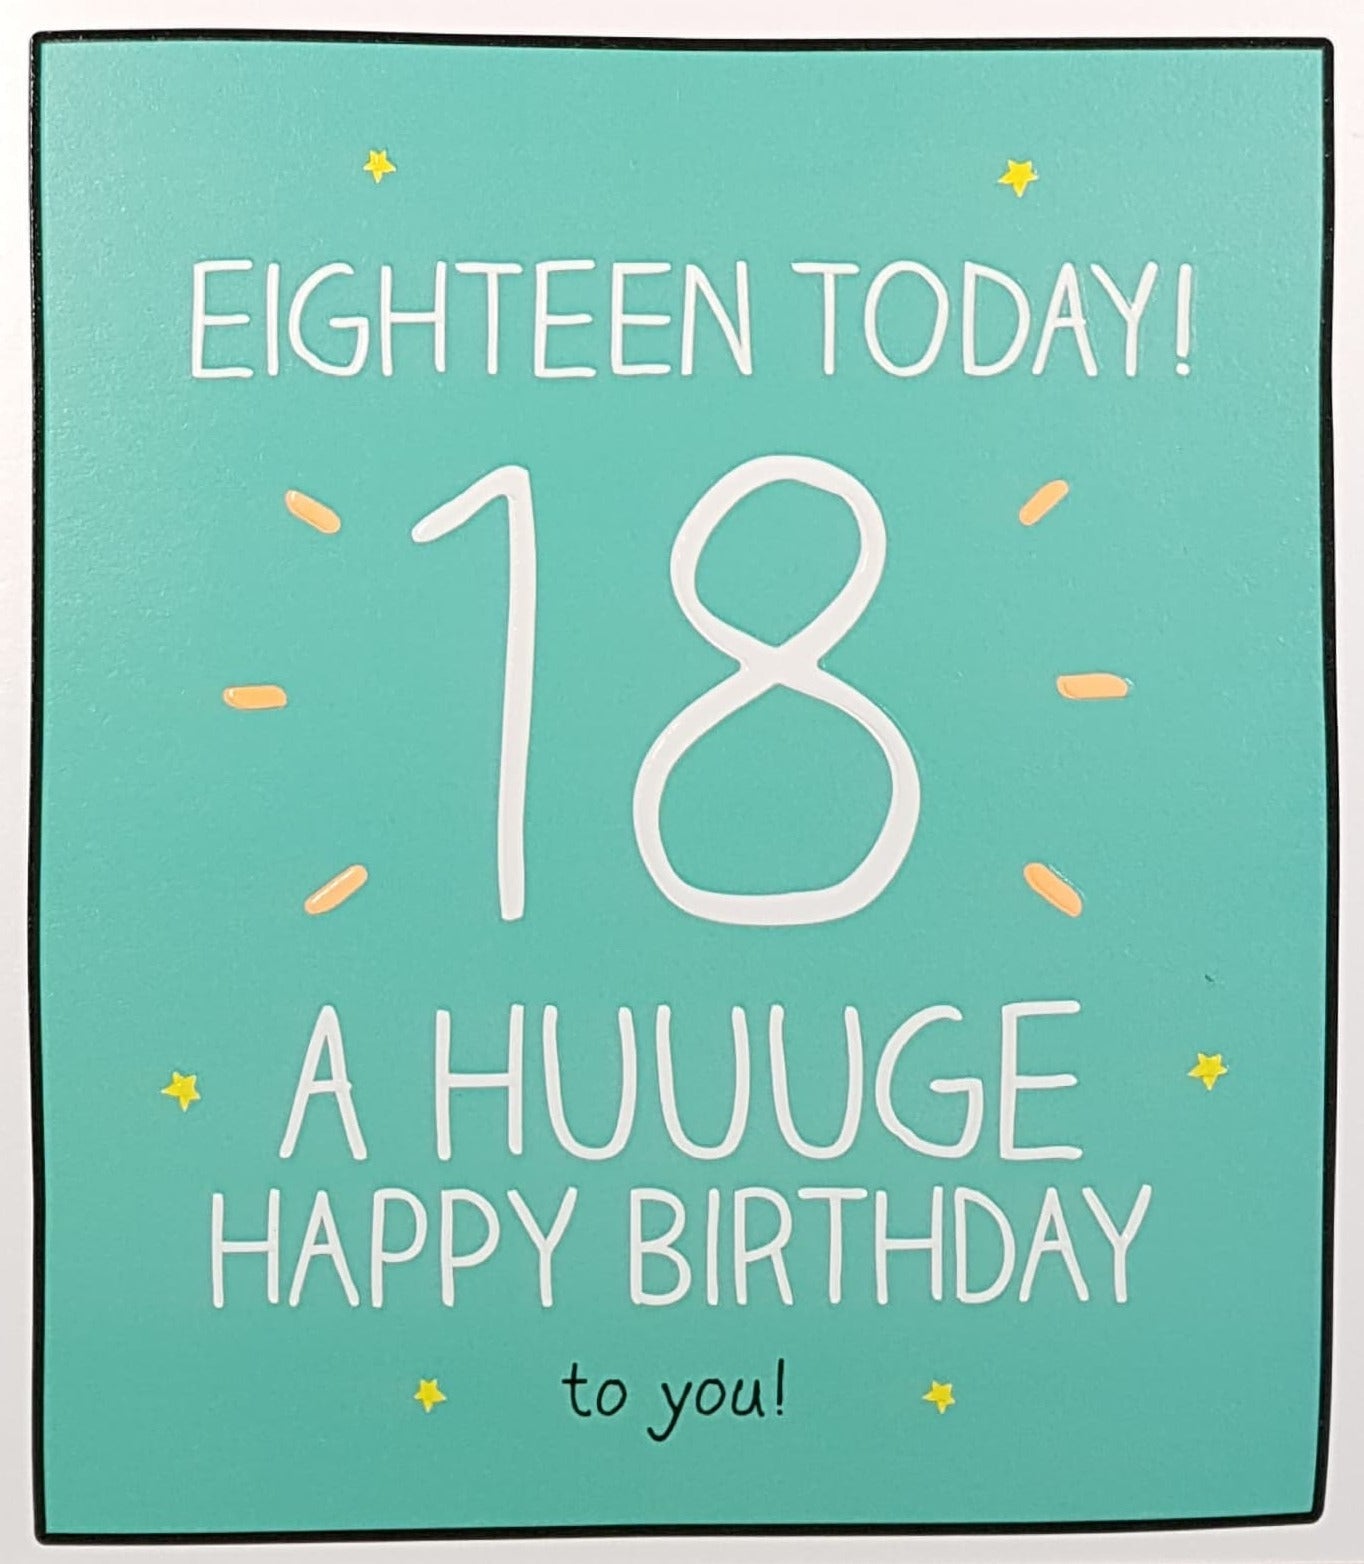 Age 18 Birthday Card - 'A Huge Happy Birthday To You!' - Card Gallery Online Ireland